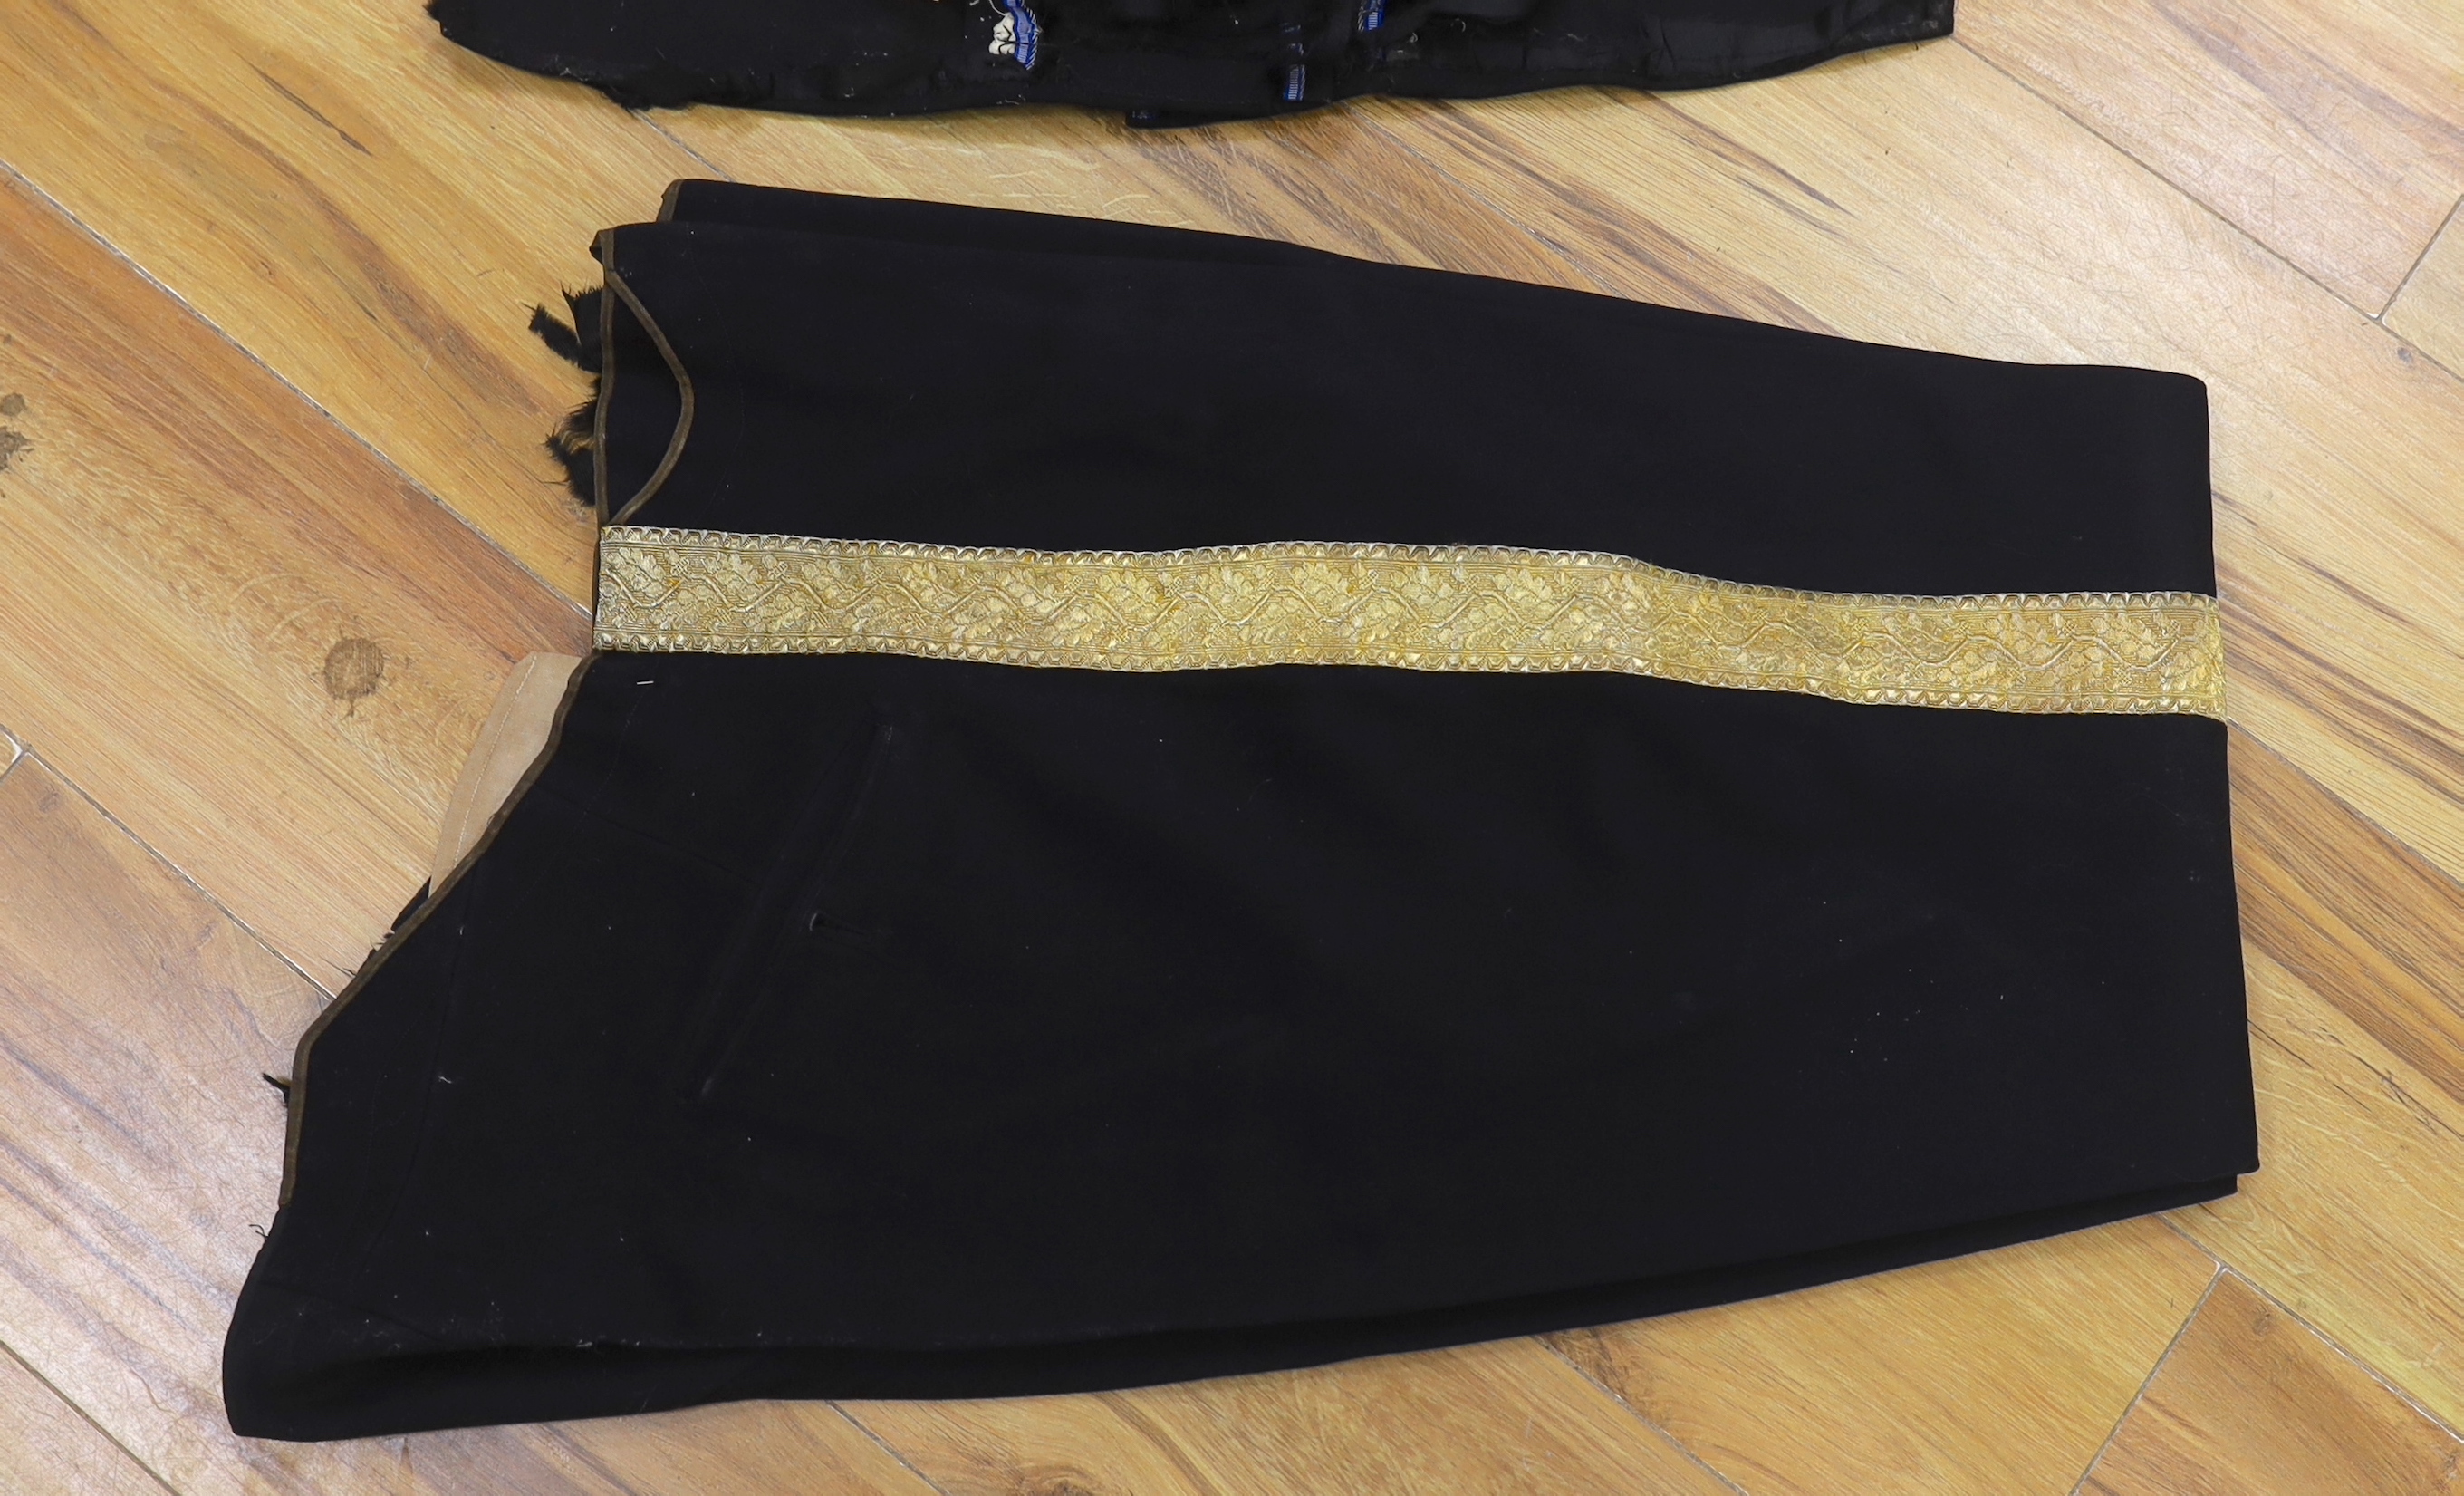 A Military black wool dress uniform, with gold decorative braiding - Image 2 of 5